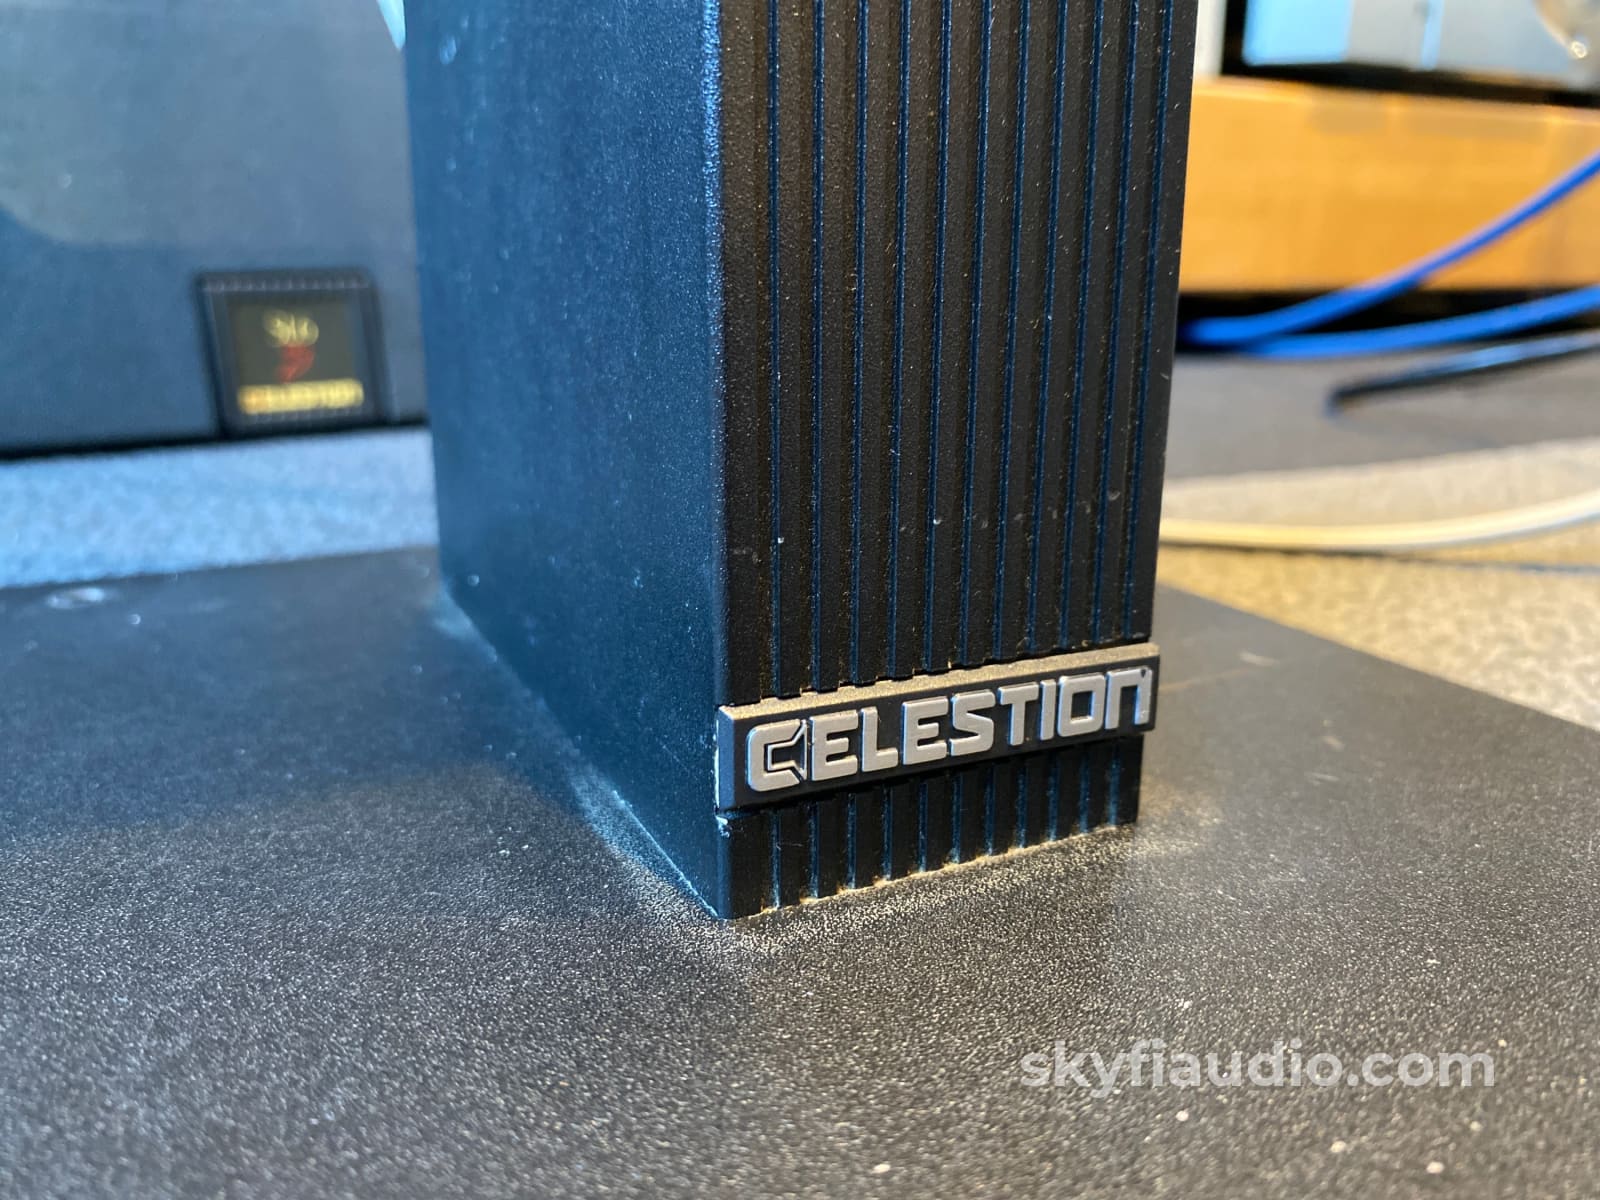 Celestion Sl6Si Vintage Bookshelf Speakers With Matching Stands